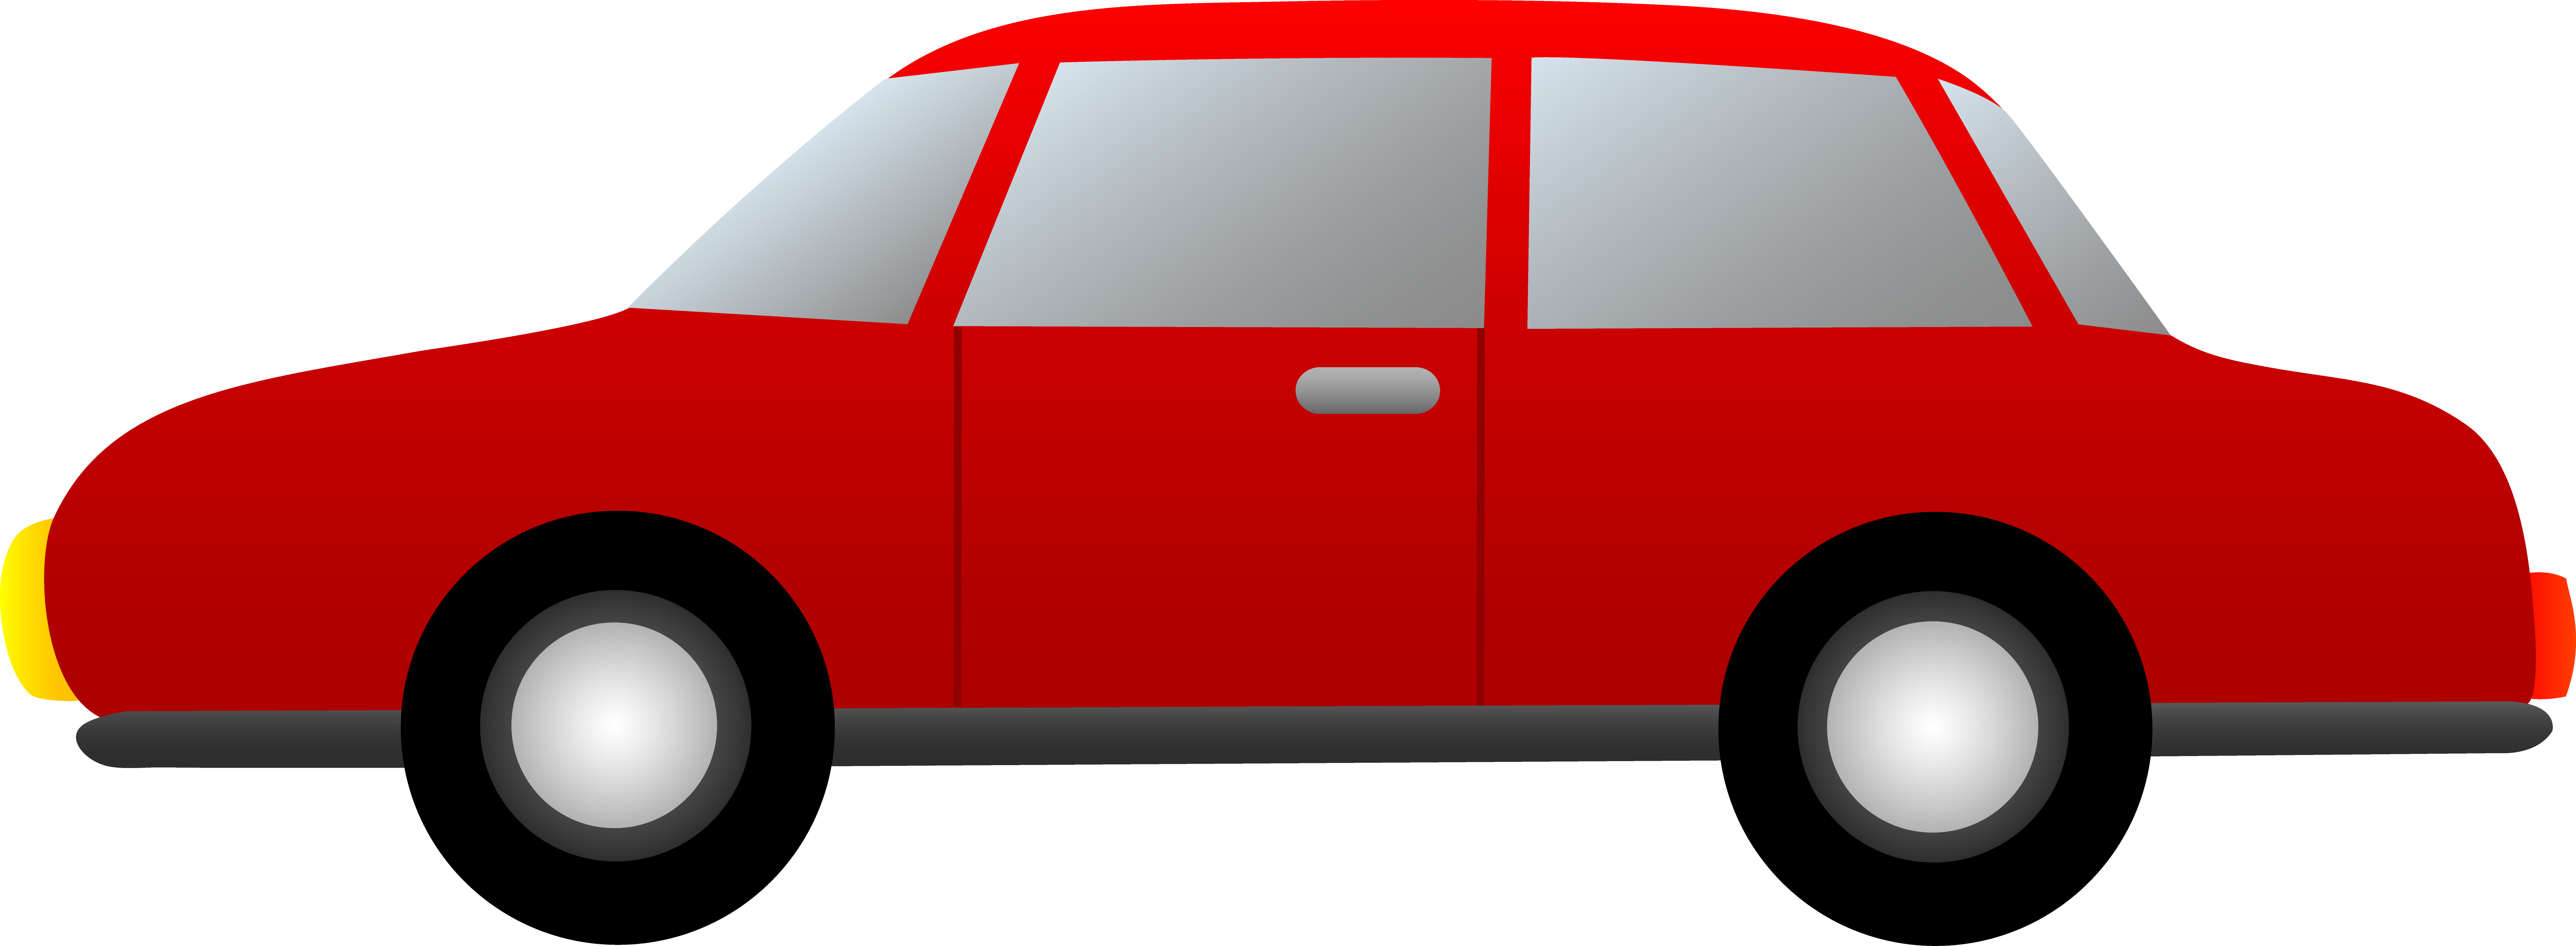 Cartoon Cars Side View - ClipArt Best